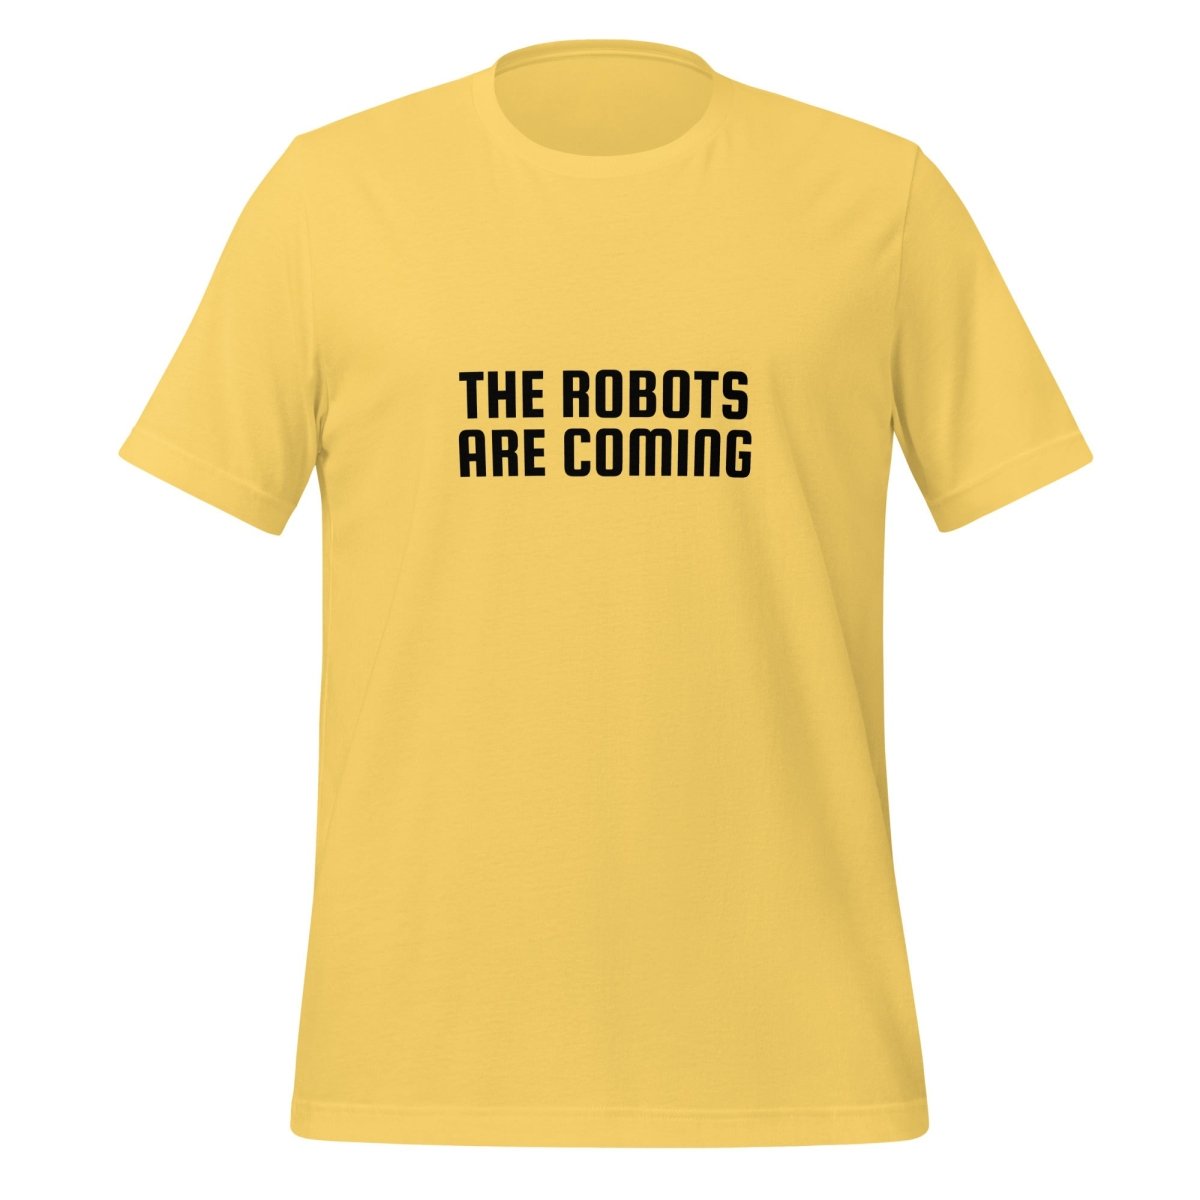 The Robots Are Coming in Black T - Shirt 2 (unisex) - Yellow - AI Store